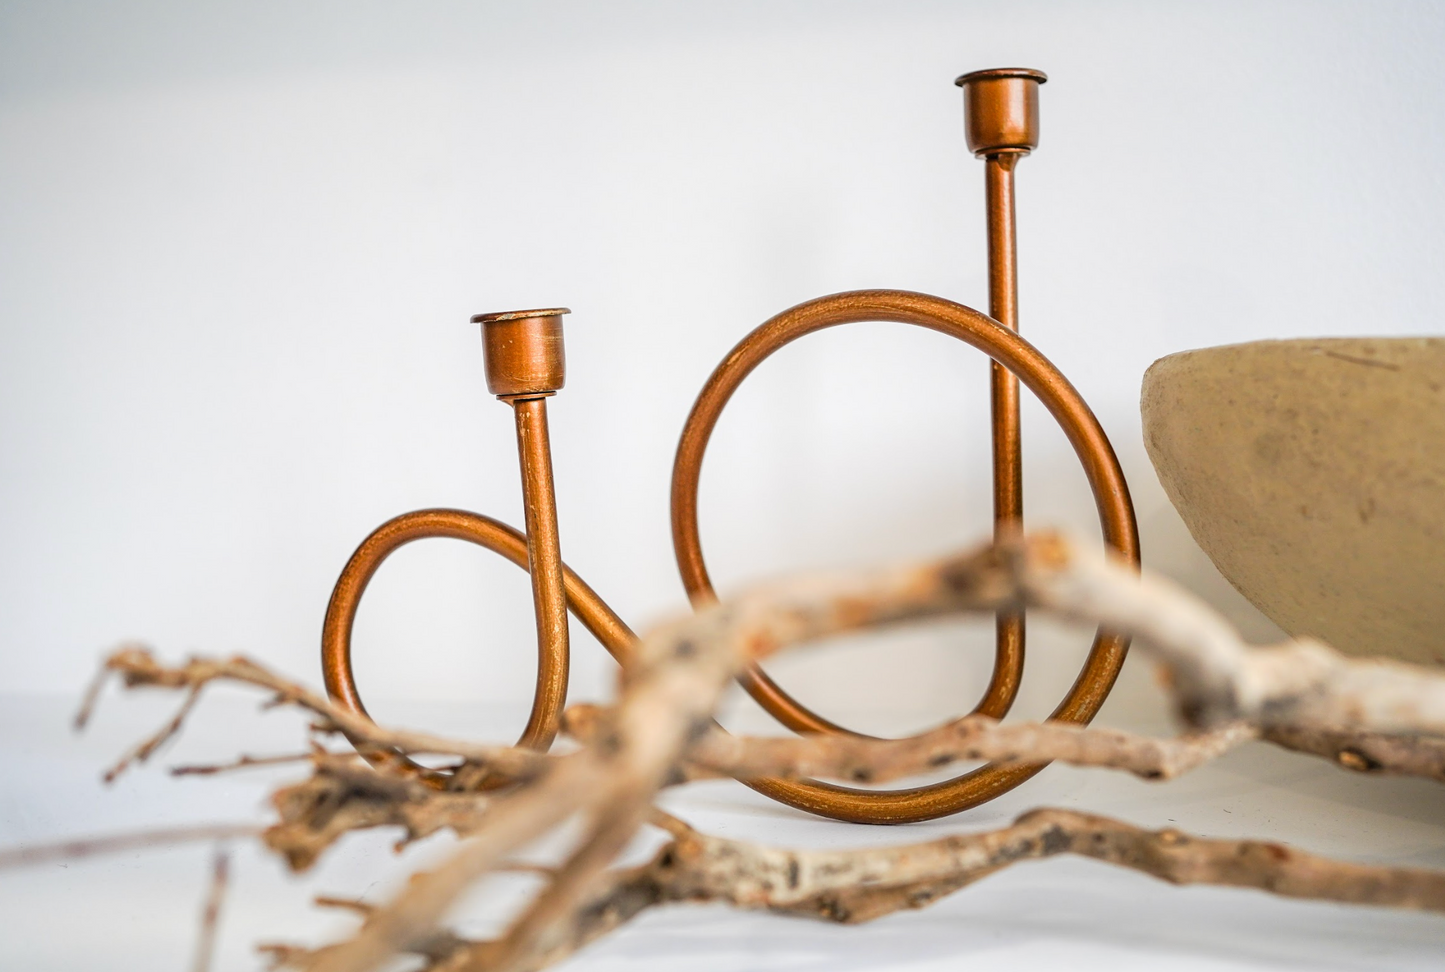 The Cooper Double Candlestick Holder